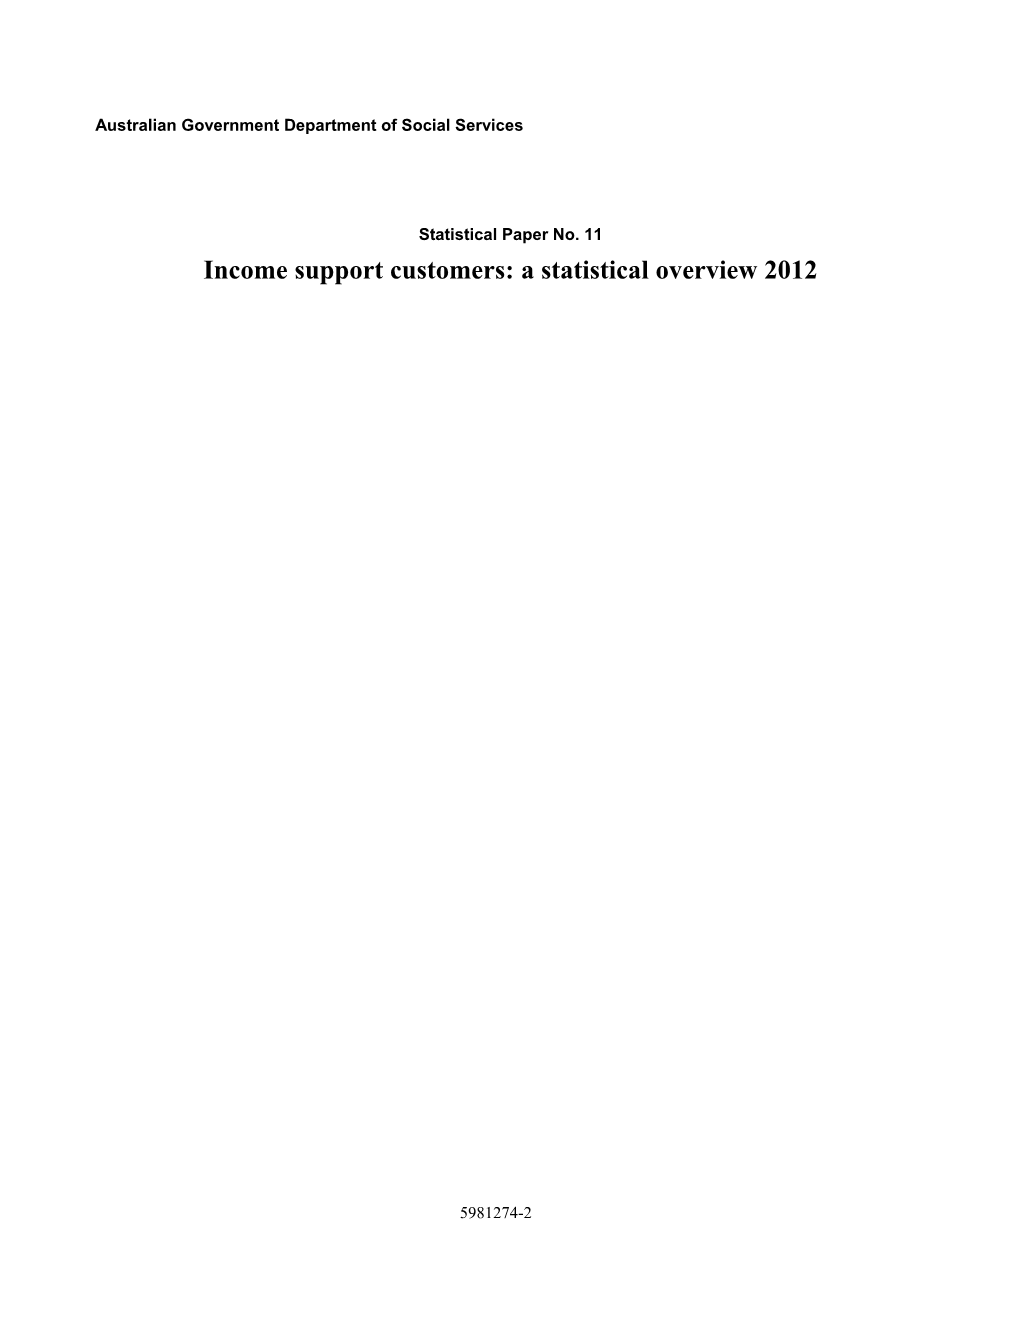 Statistical Paper No. 11 Income Support Customers: a Statistical Overview 2012